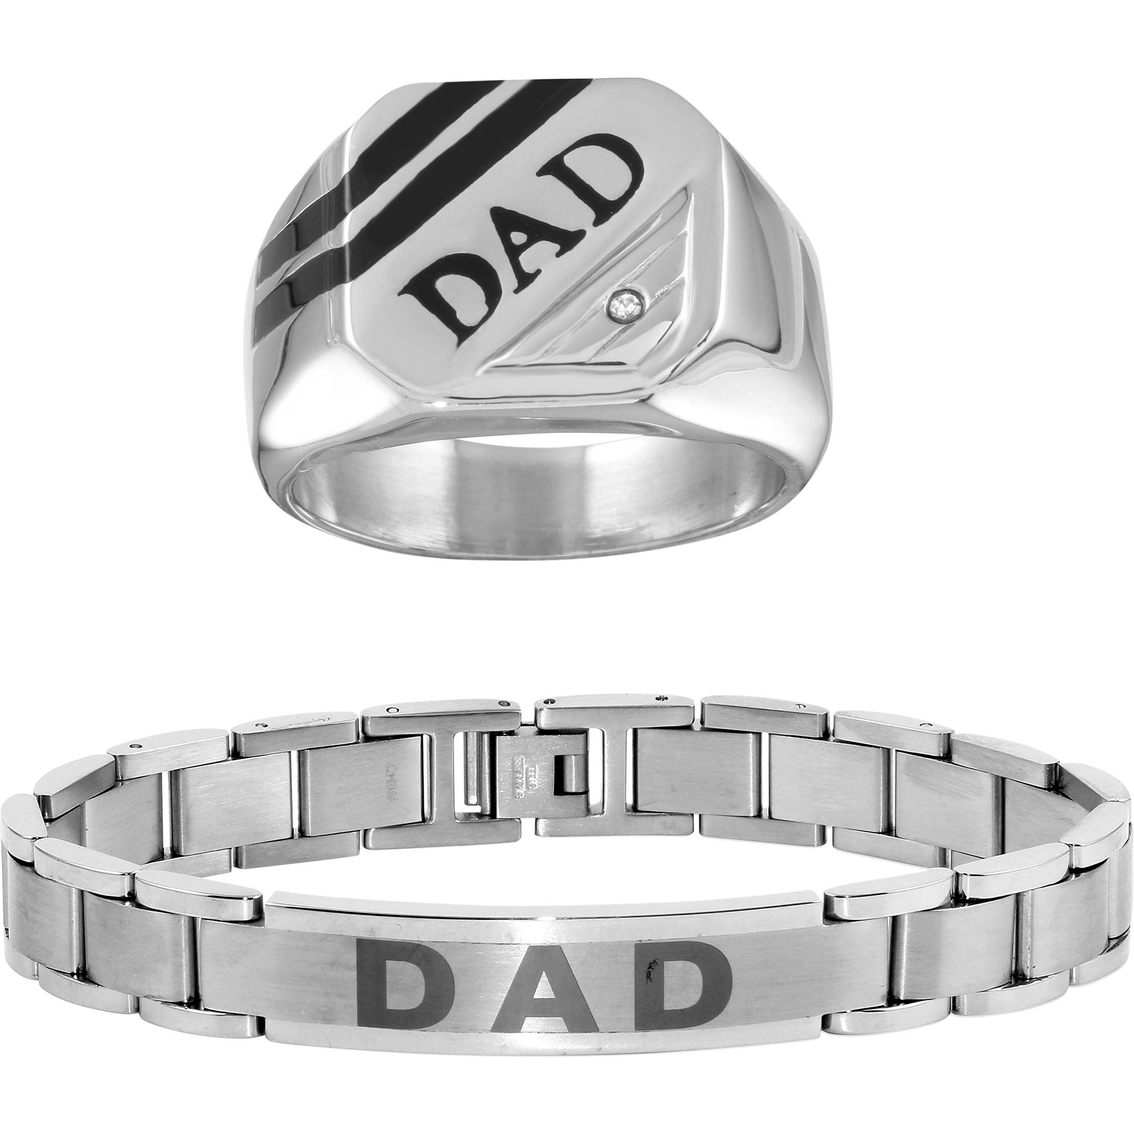 Men's Stainless Steel Dad Ring Size 10 